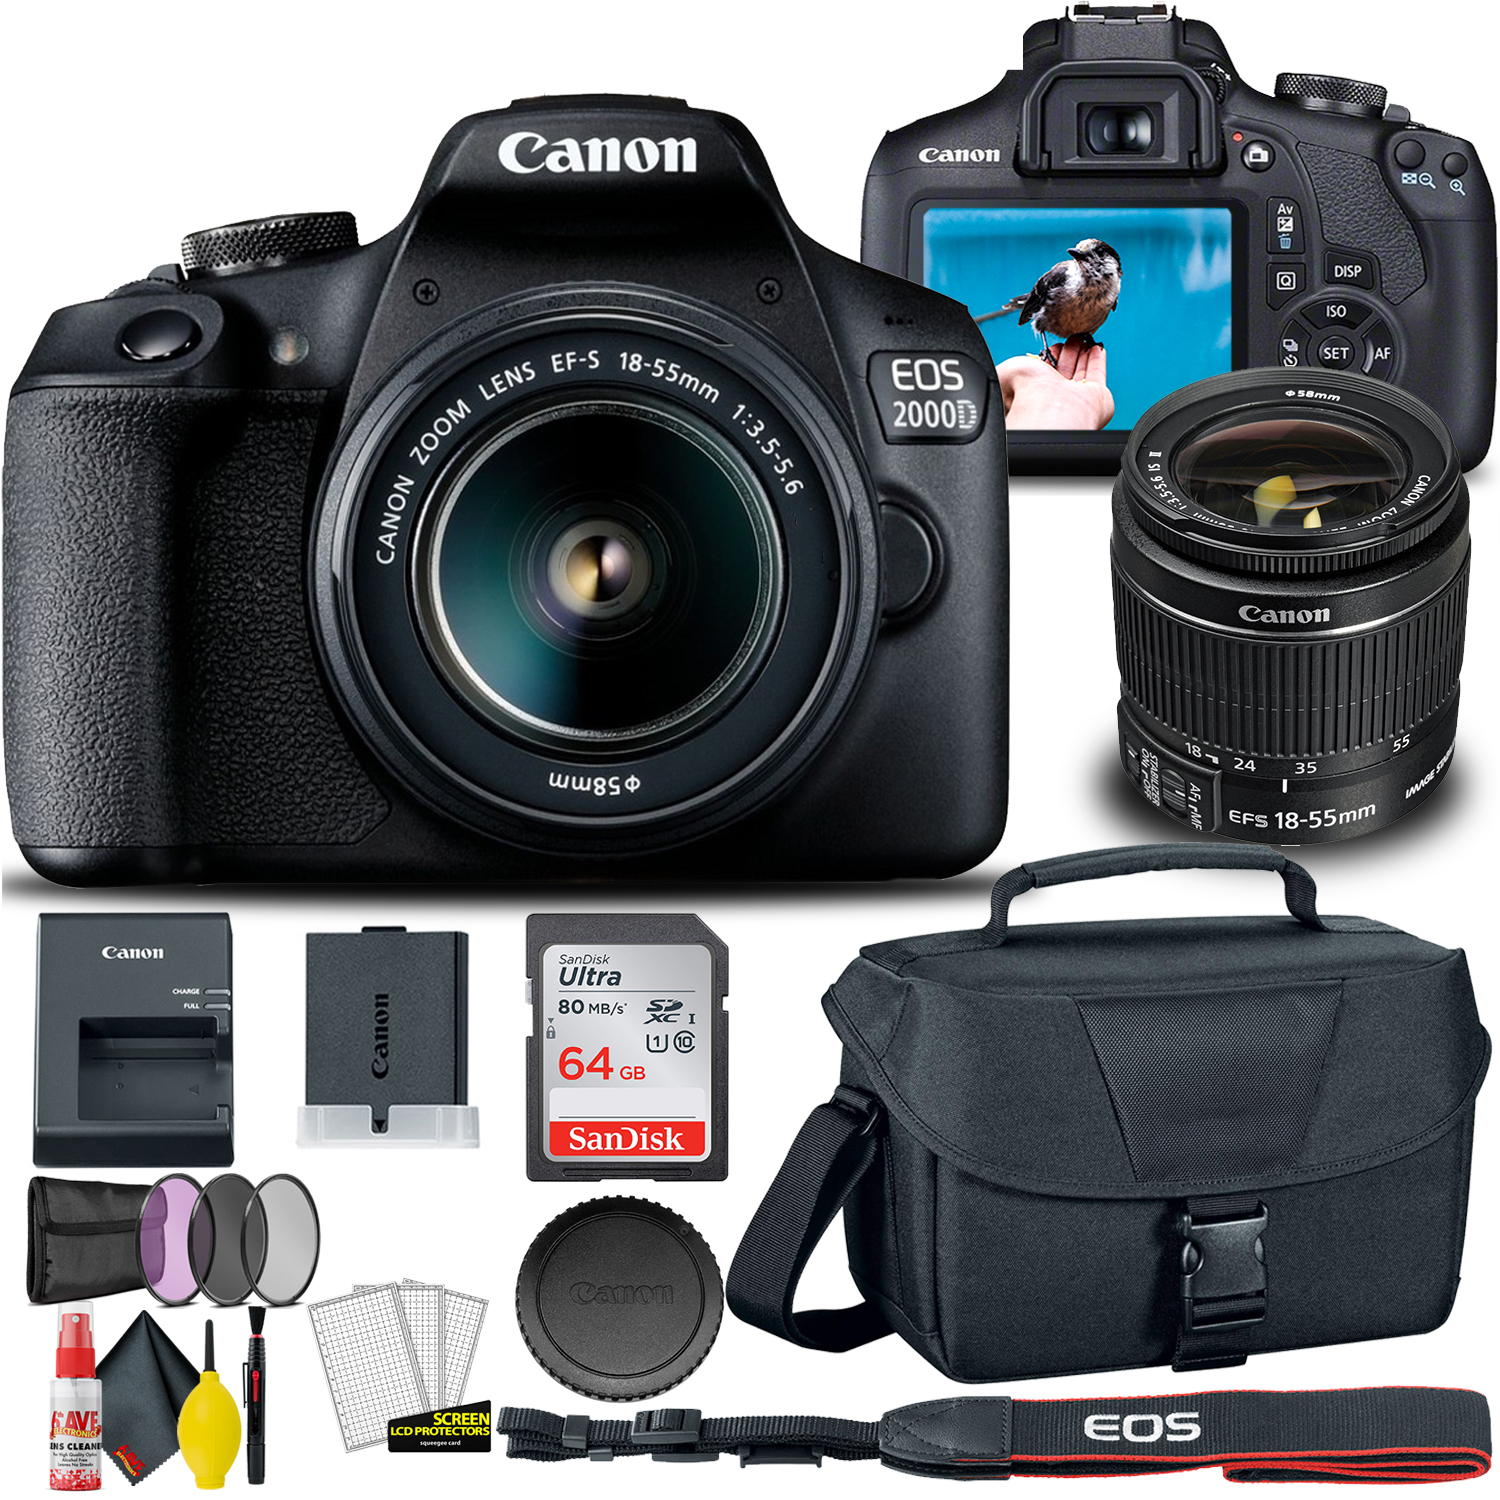 Canon EOS 2000D / Rebel T7 DSLR (New) 18-55 Lens, Wi-Fi, Filter, Bag, Card and Many More - image 1 of 9